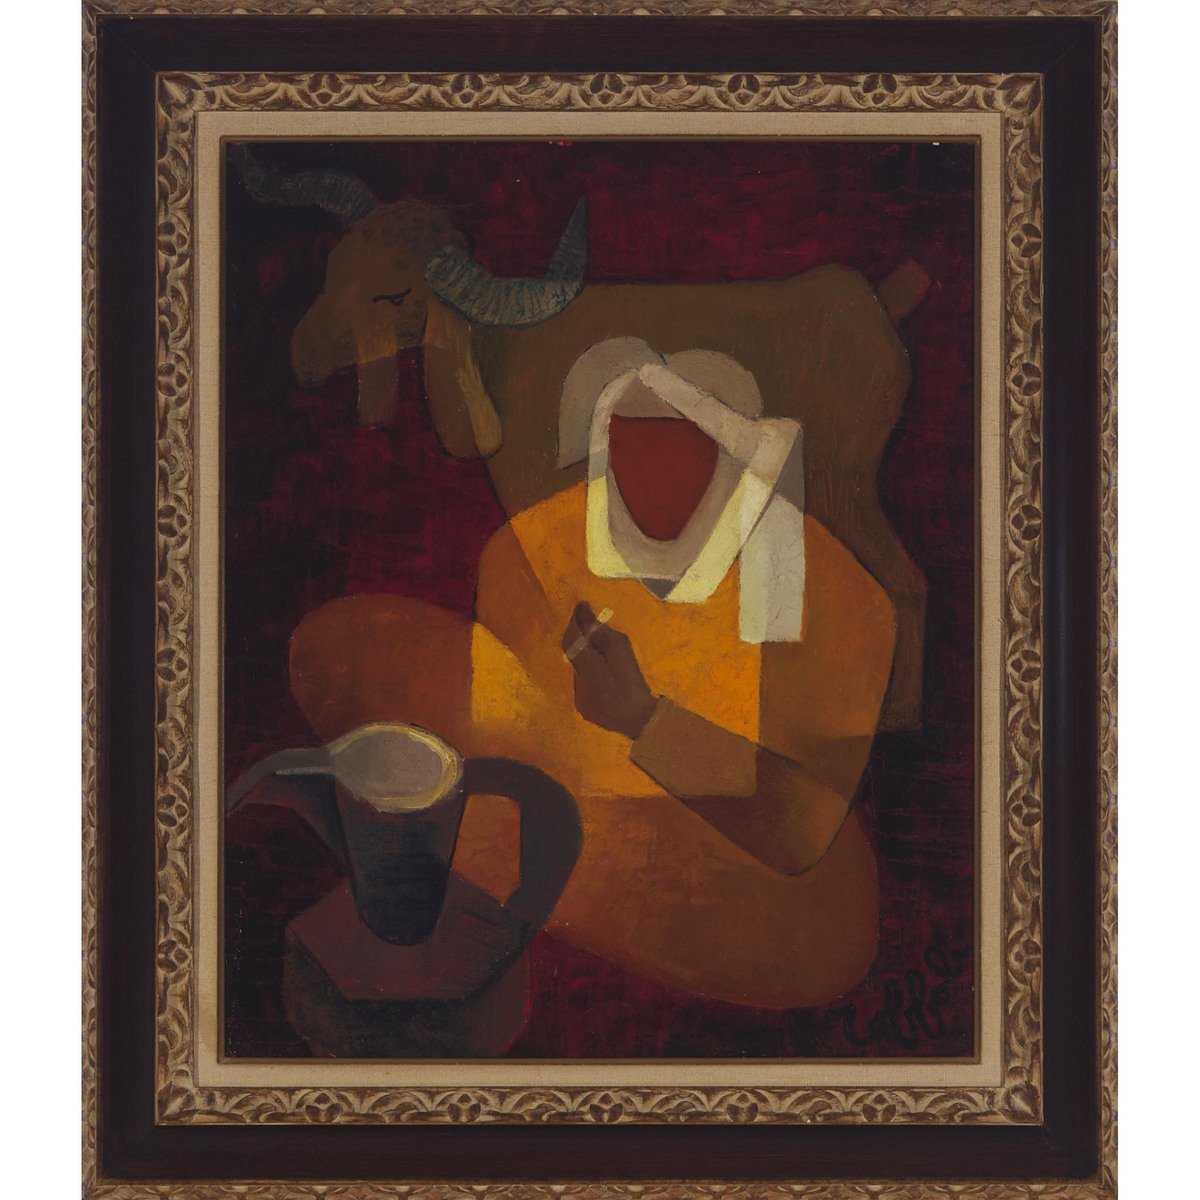 Louis Toffoli (1907-1999), LE FUMEUR, signed lower right; titled verso, 28 x 23.25 in — 71.1 x 59.1 - Image 2 of 6